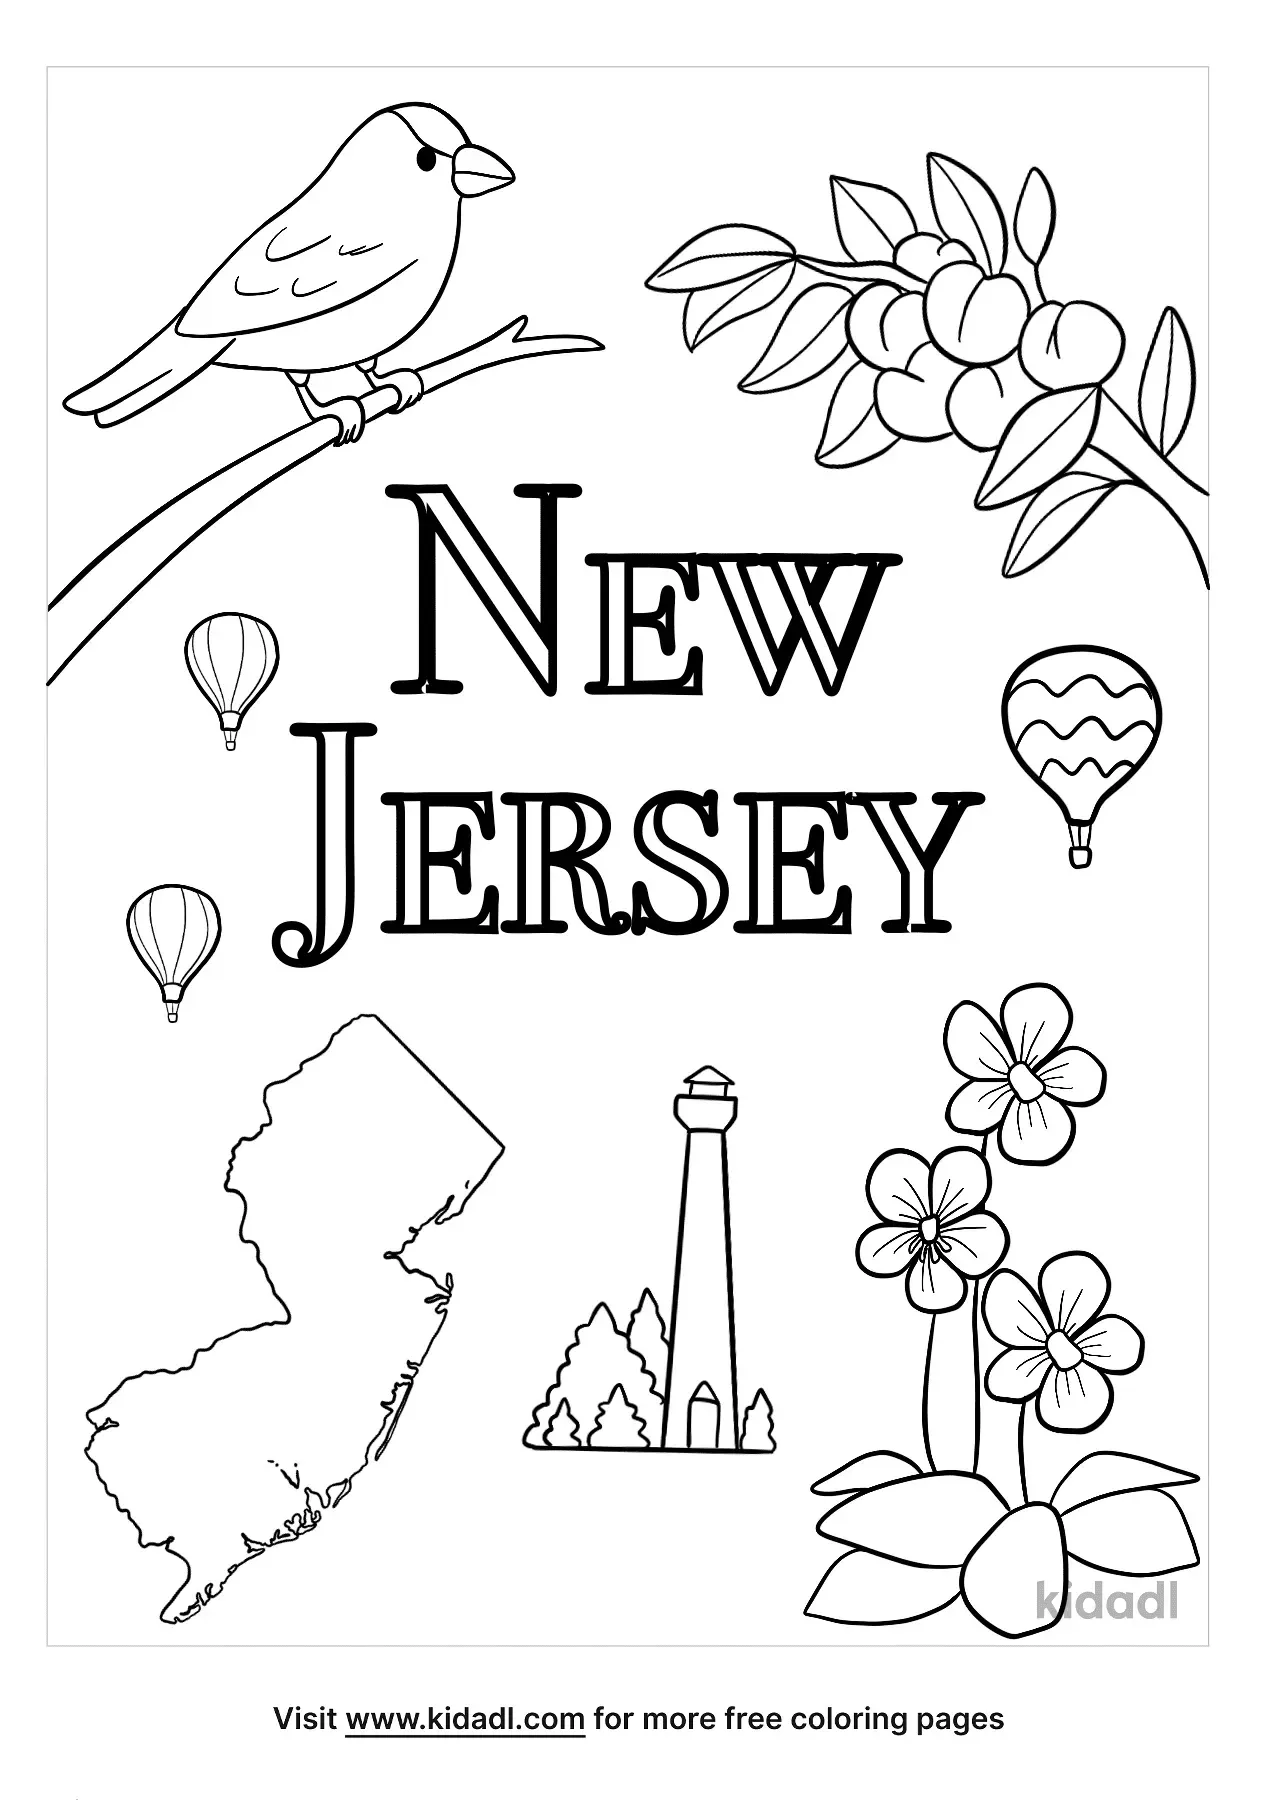 Free New Jersey Coloring Page | Coloring Page Printables | Kidadl